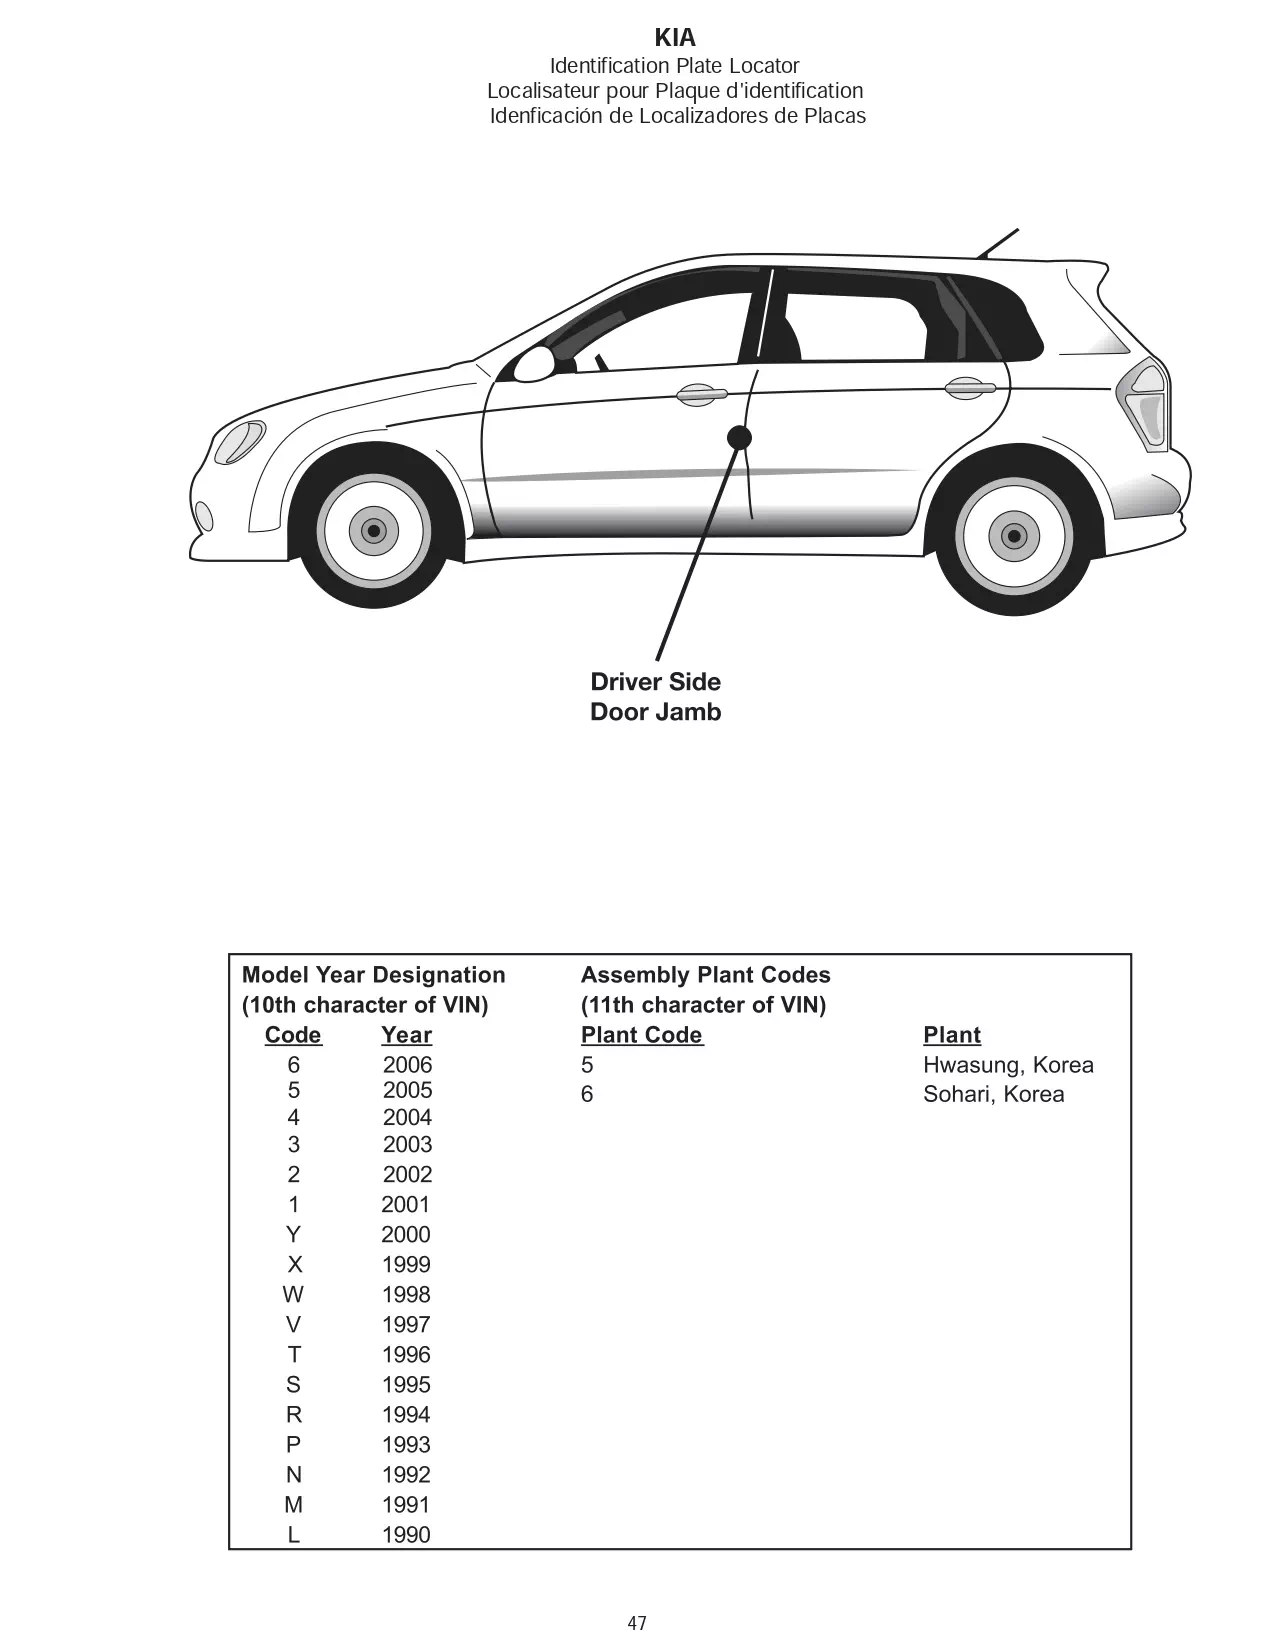 Paint Code sticker location for 2006 Kia Vehicles